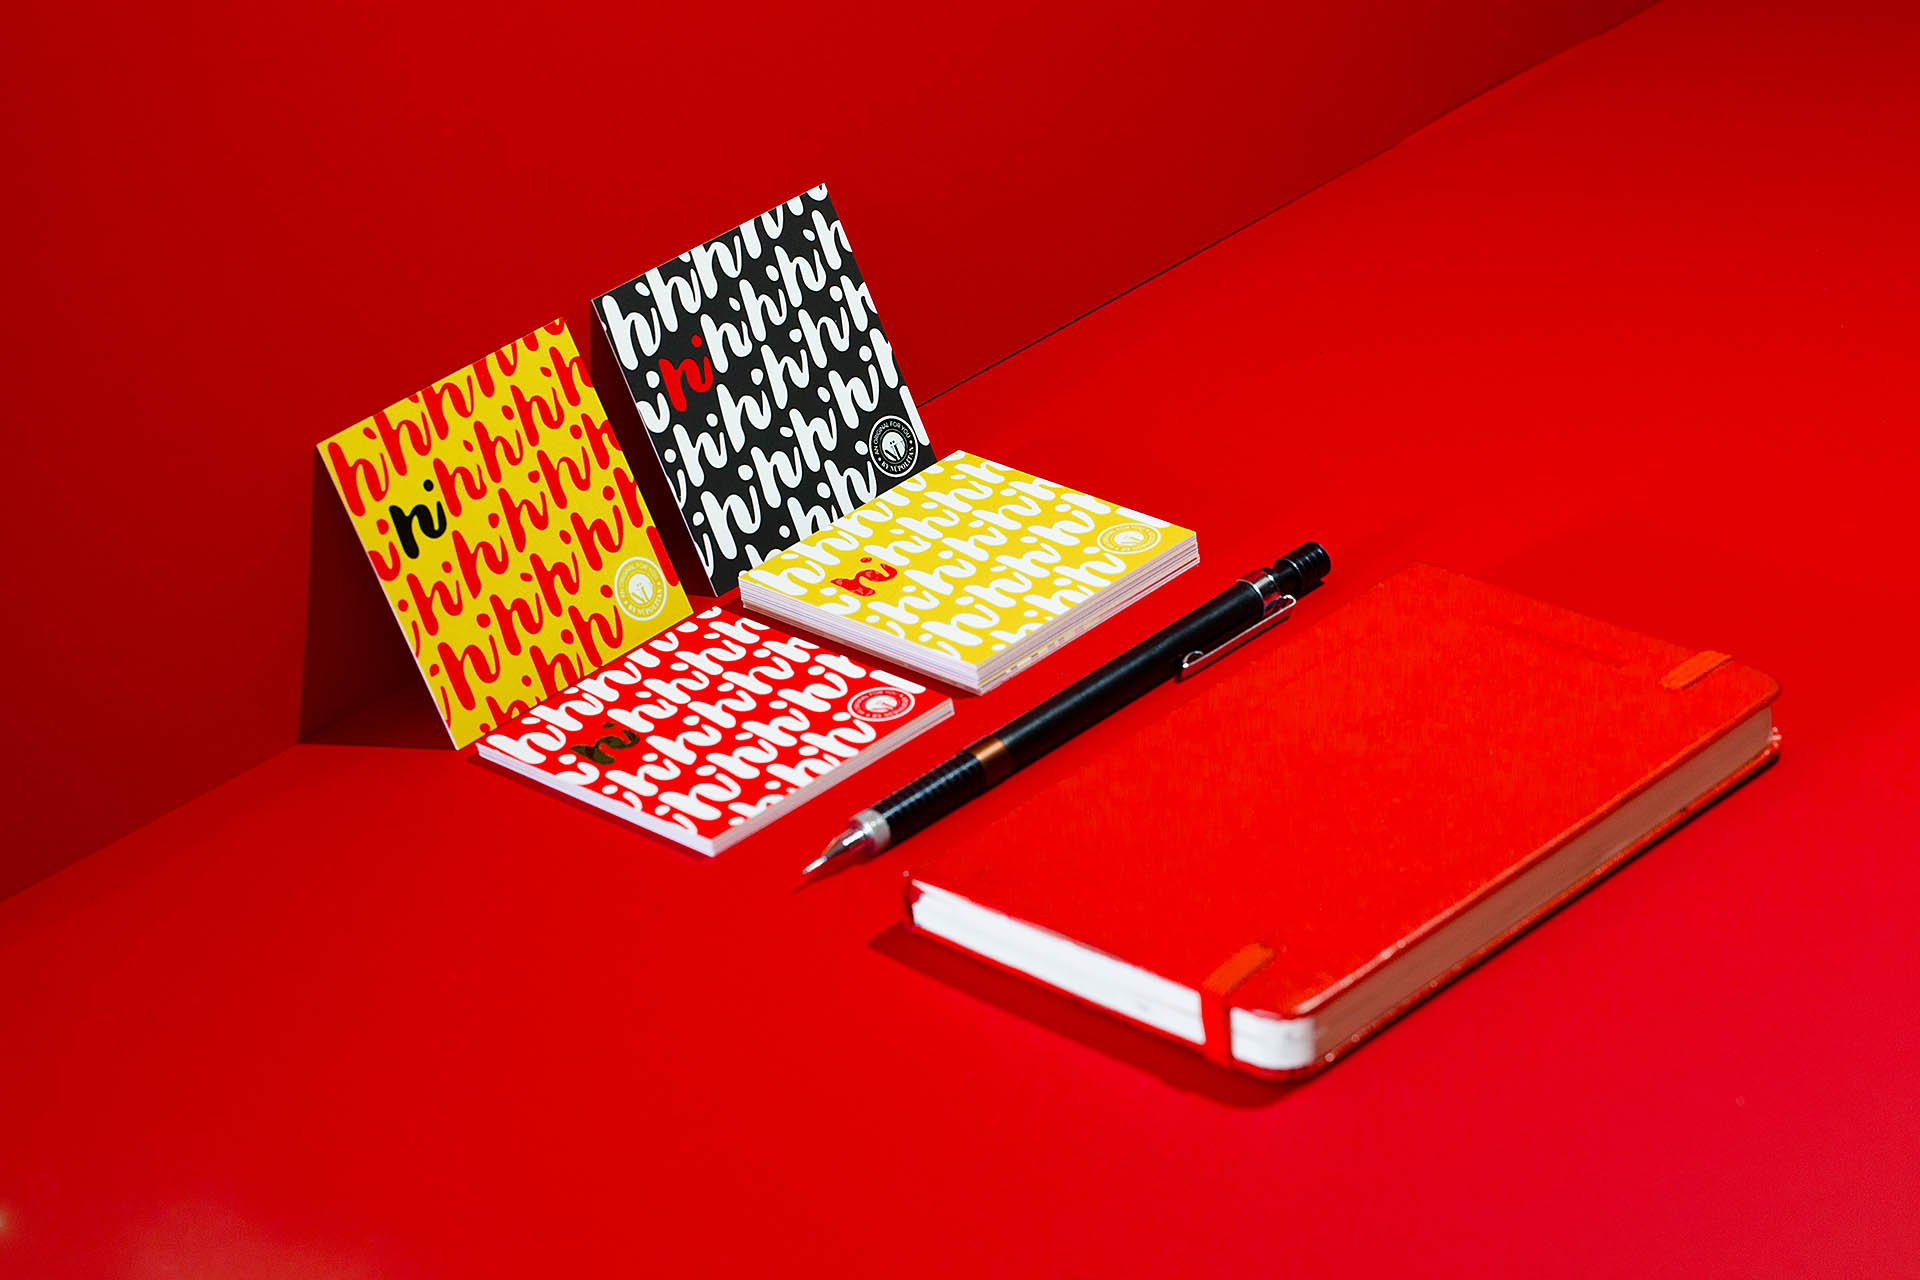 Four colorful cards covered with a repeating hi pattern, a red journal, and black pen on a red background